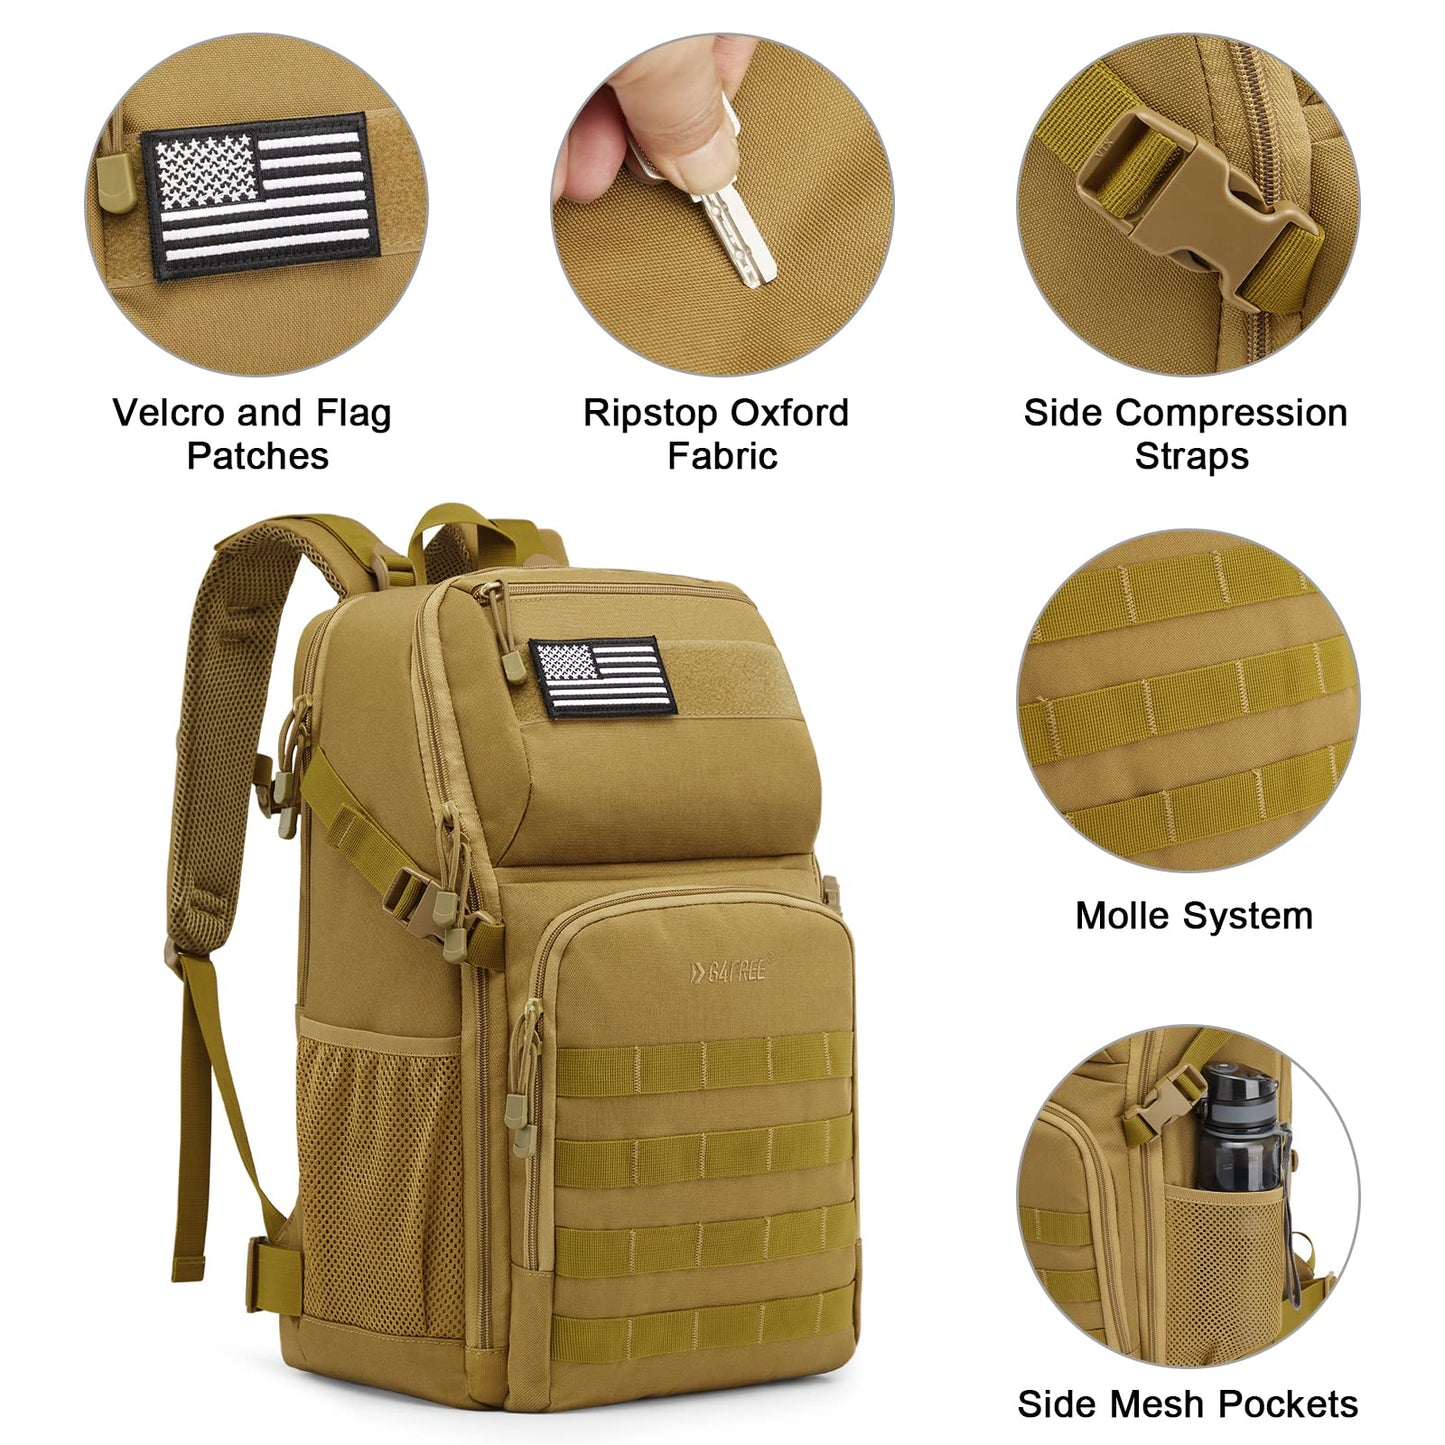 G4Free 35L Military Tactical Backpack Survival Molle Pack